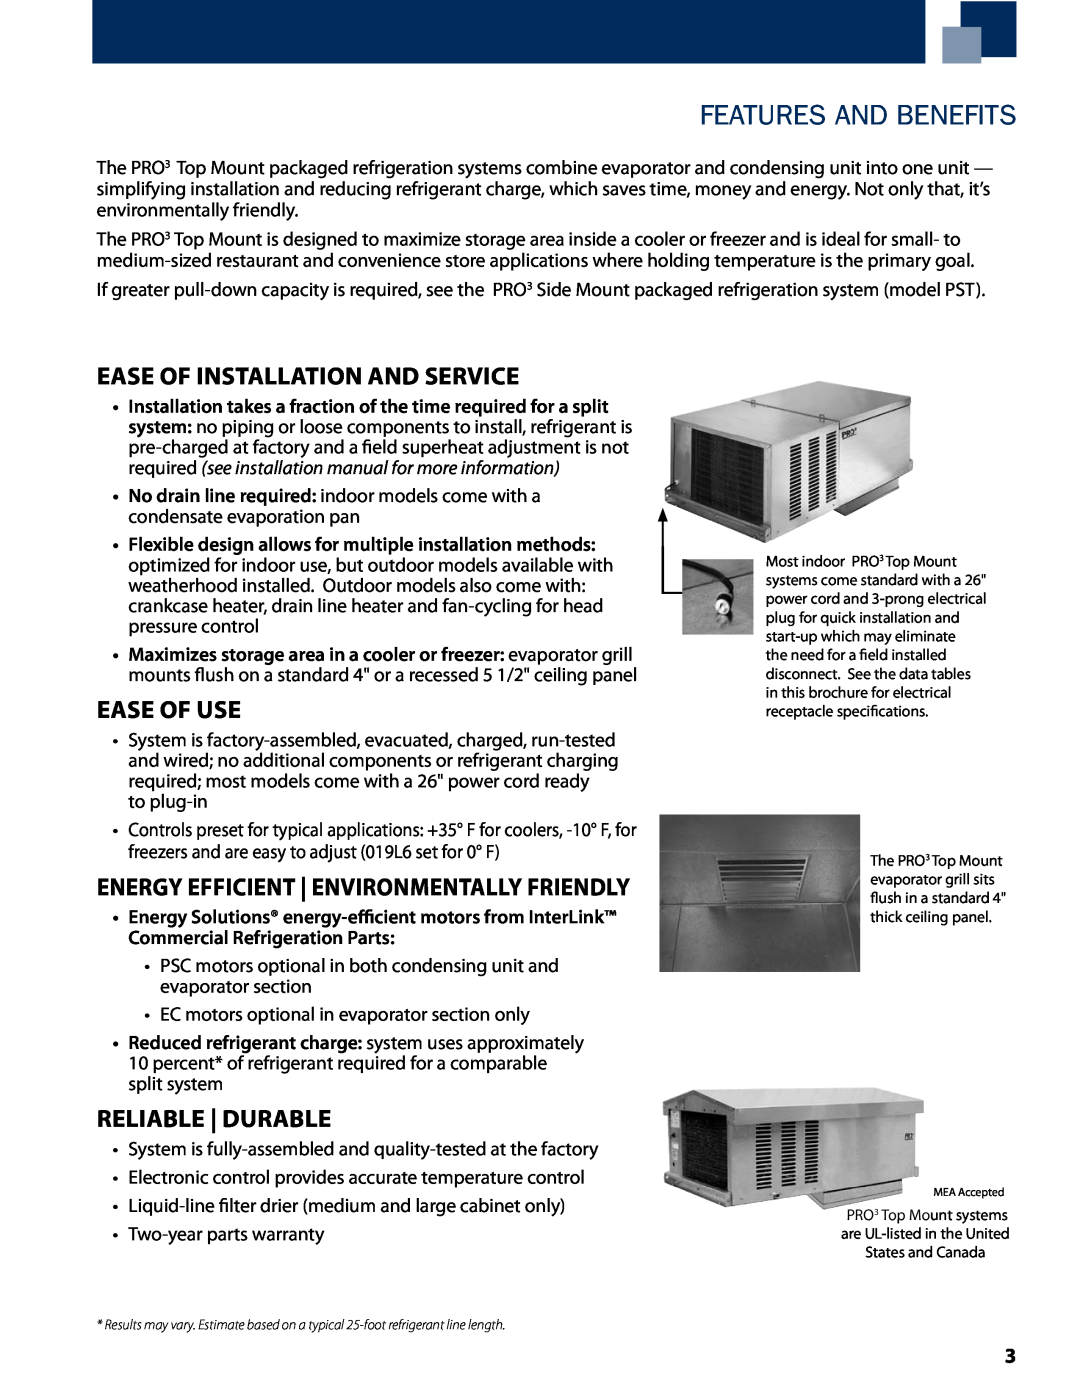 Heatcraft Refrigeration Products PTN, PTT manual Features and Benefits, Ease of Installation and Service, Ease of Use 